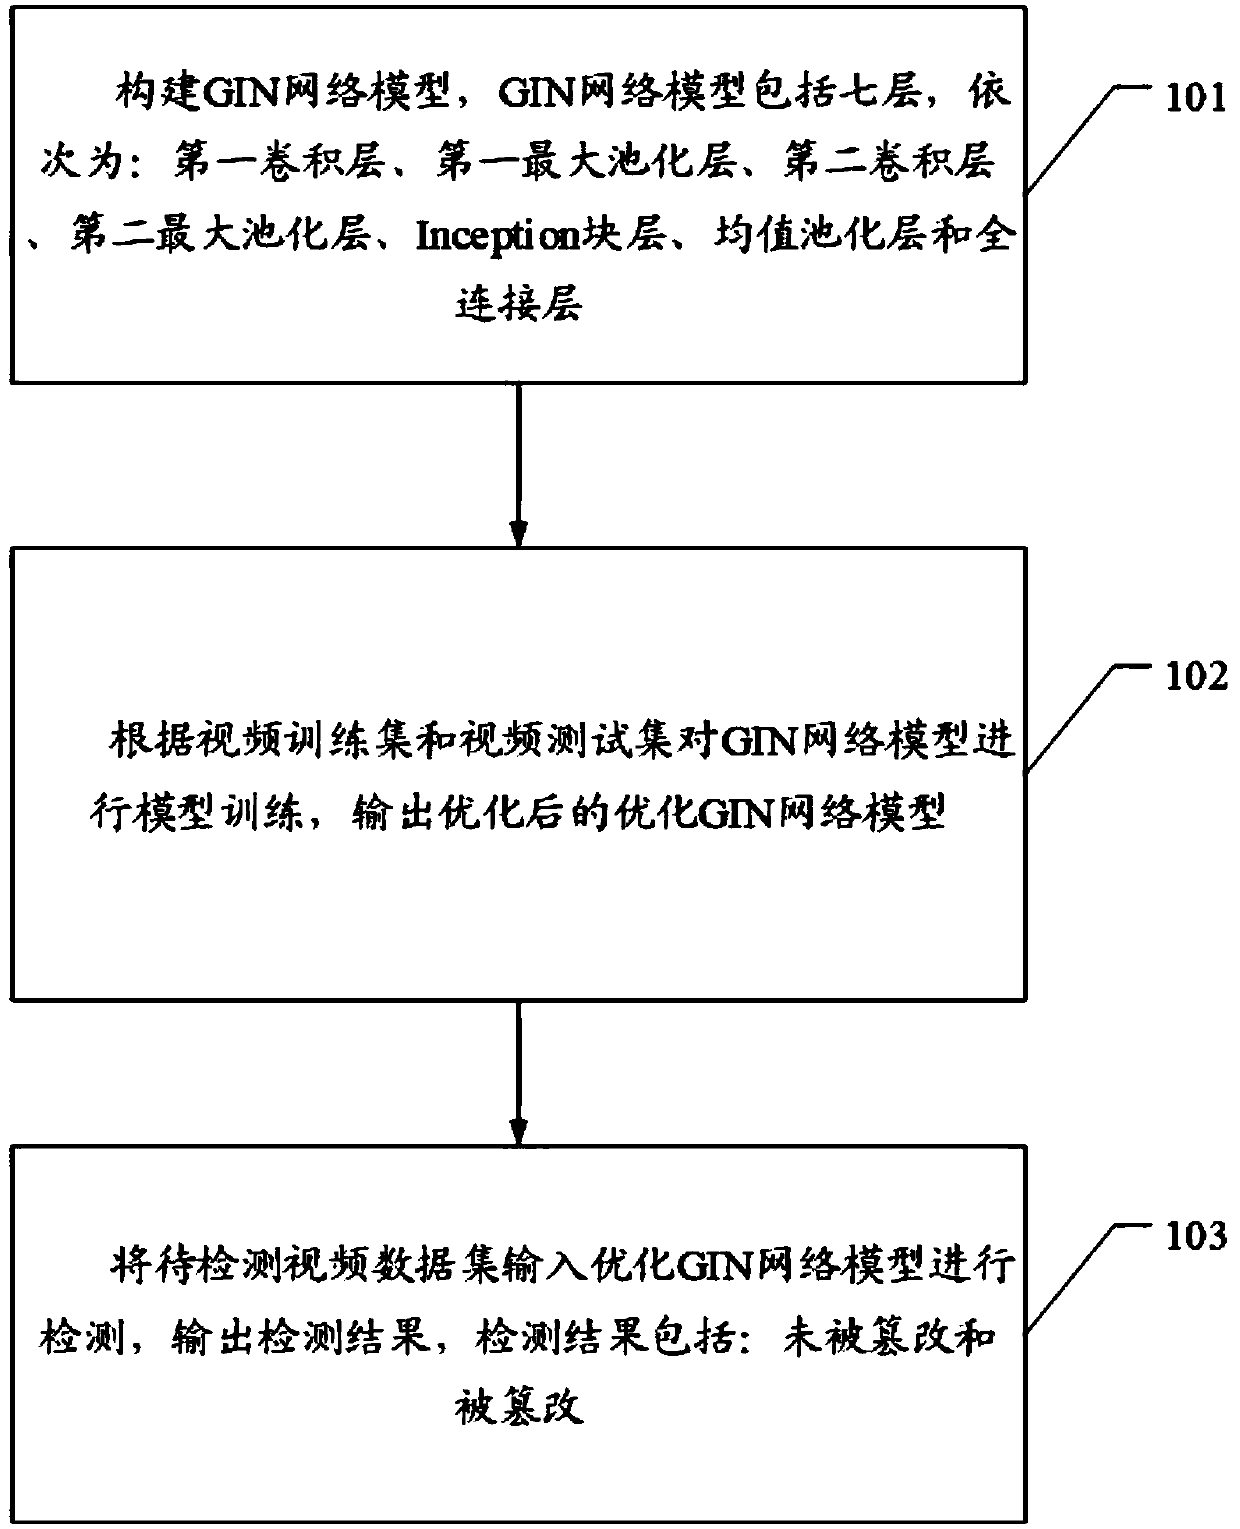 Video area removal tampering detection method and device